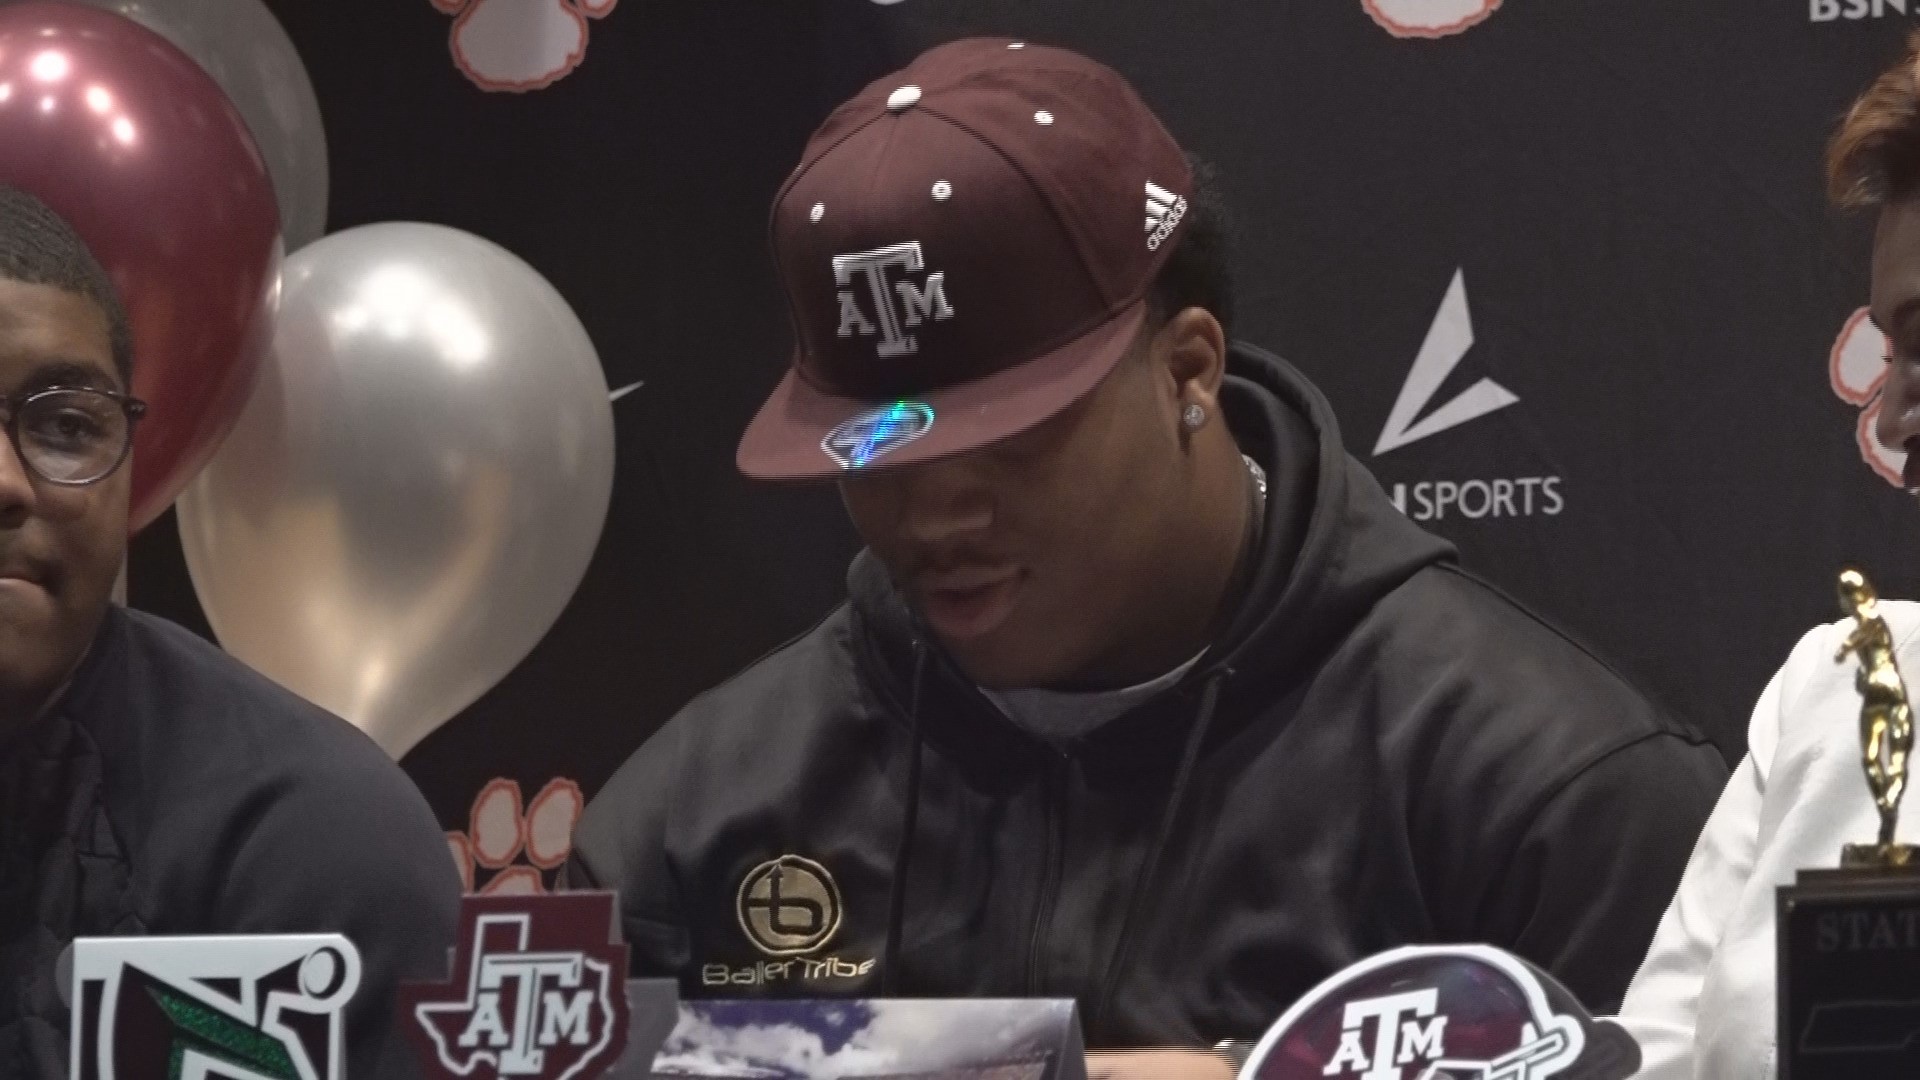 Nolen signed on National Early Signing Day on Wednesday. He committed to the Aggies back in November.